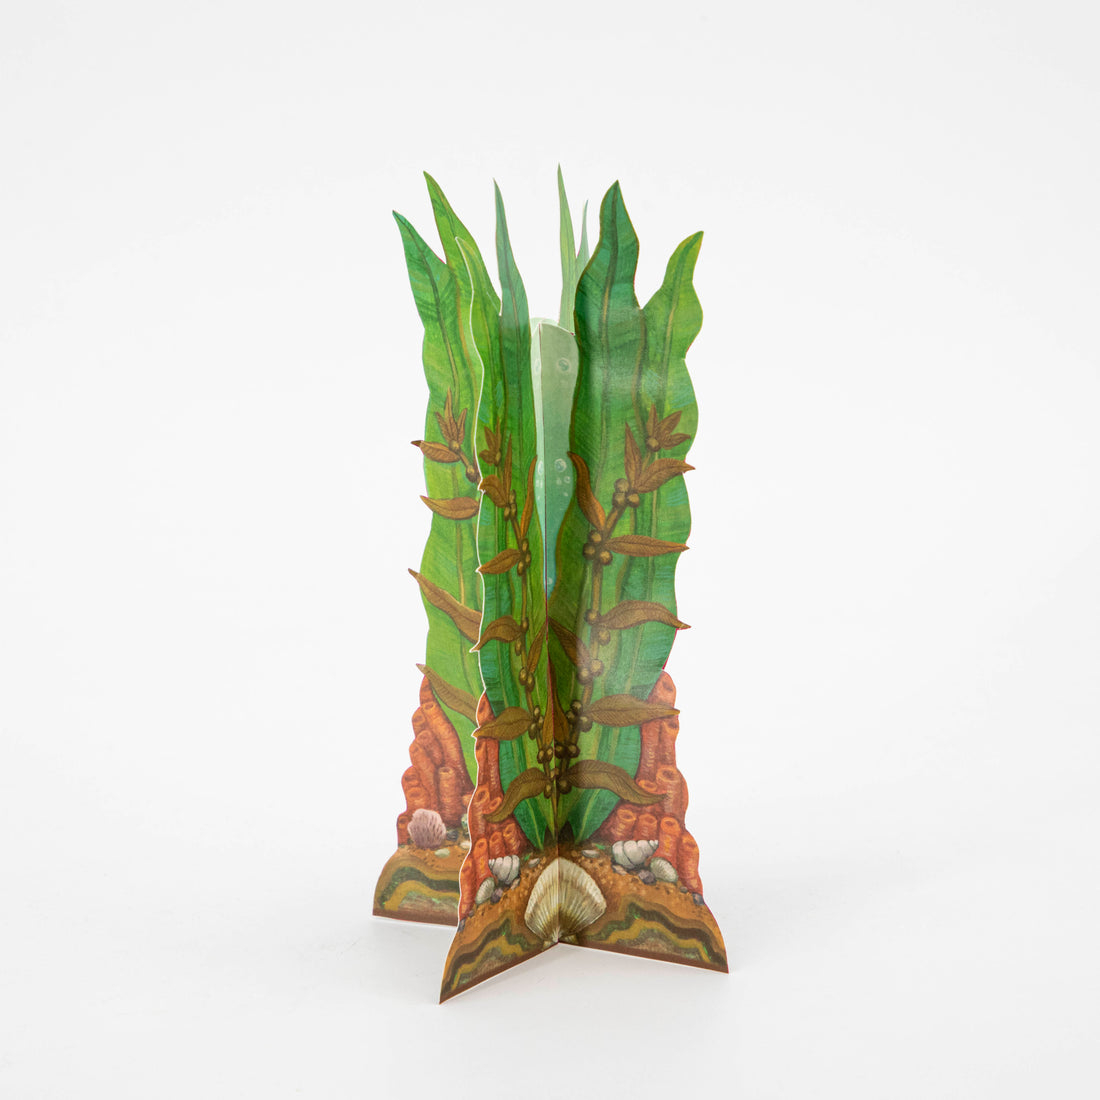 A die-cut, illustrated table ornament that stans up on its own, featuring tall, vibrant green seaweed with orange coral and white shells around the base.